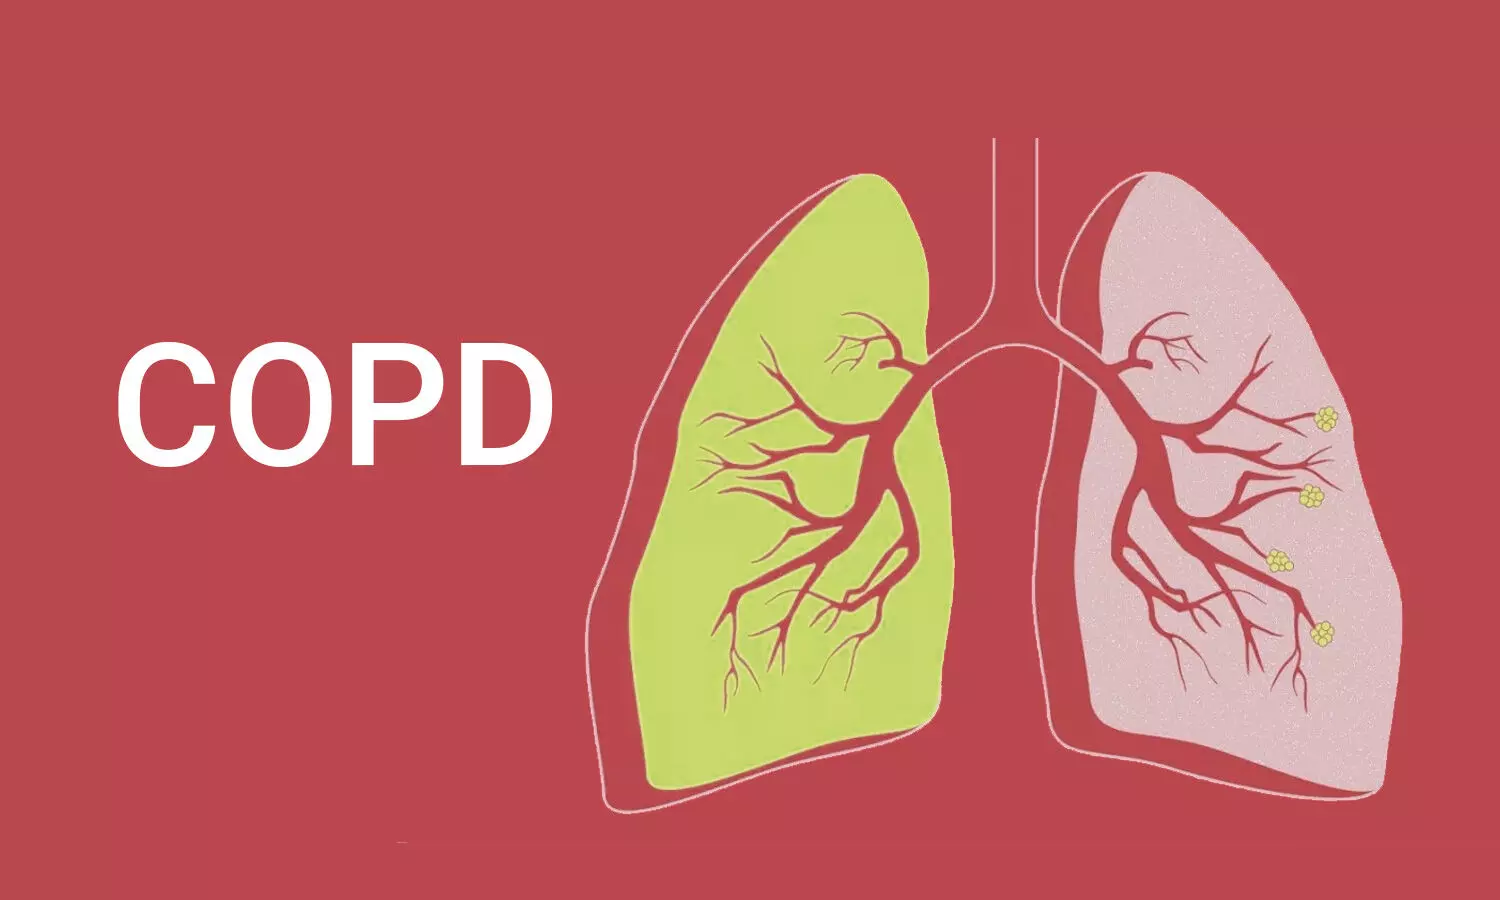 COPD patients at higher risk for future functional gastrointestinal disorders: Study